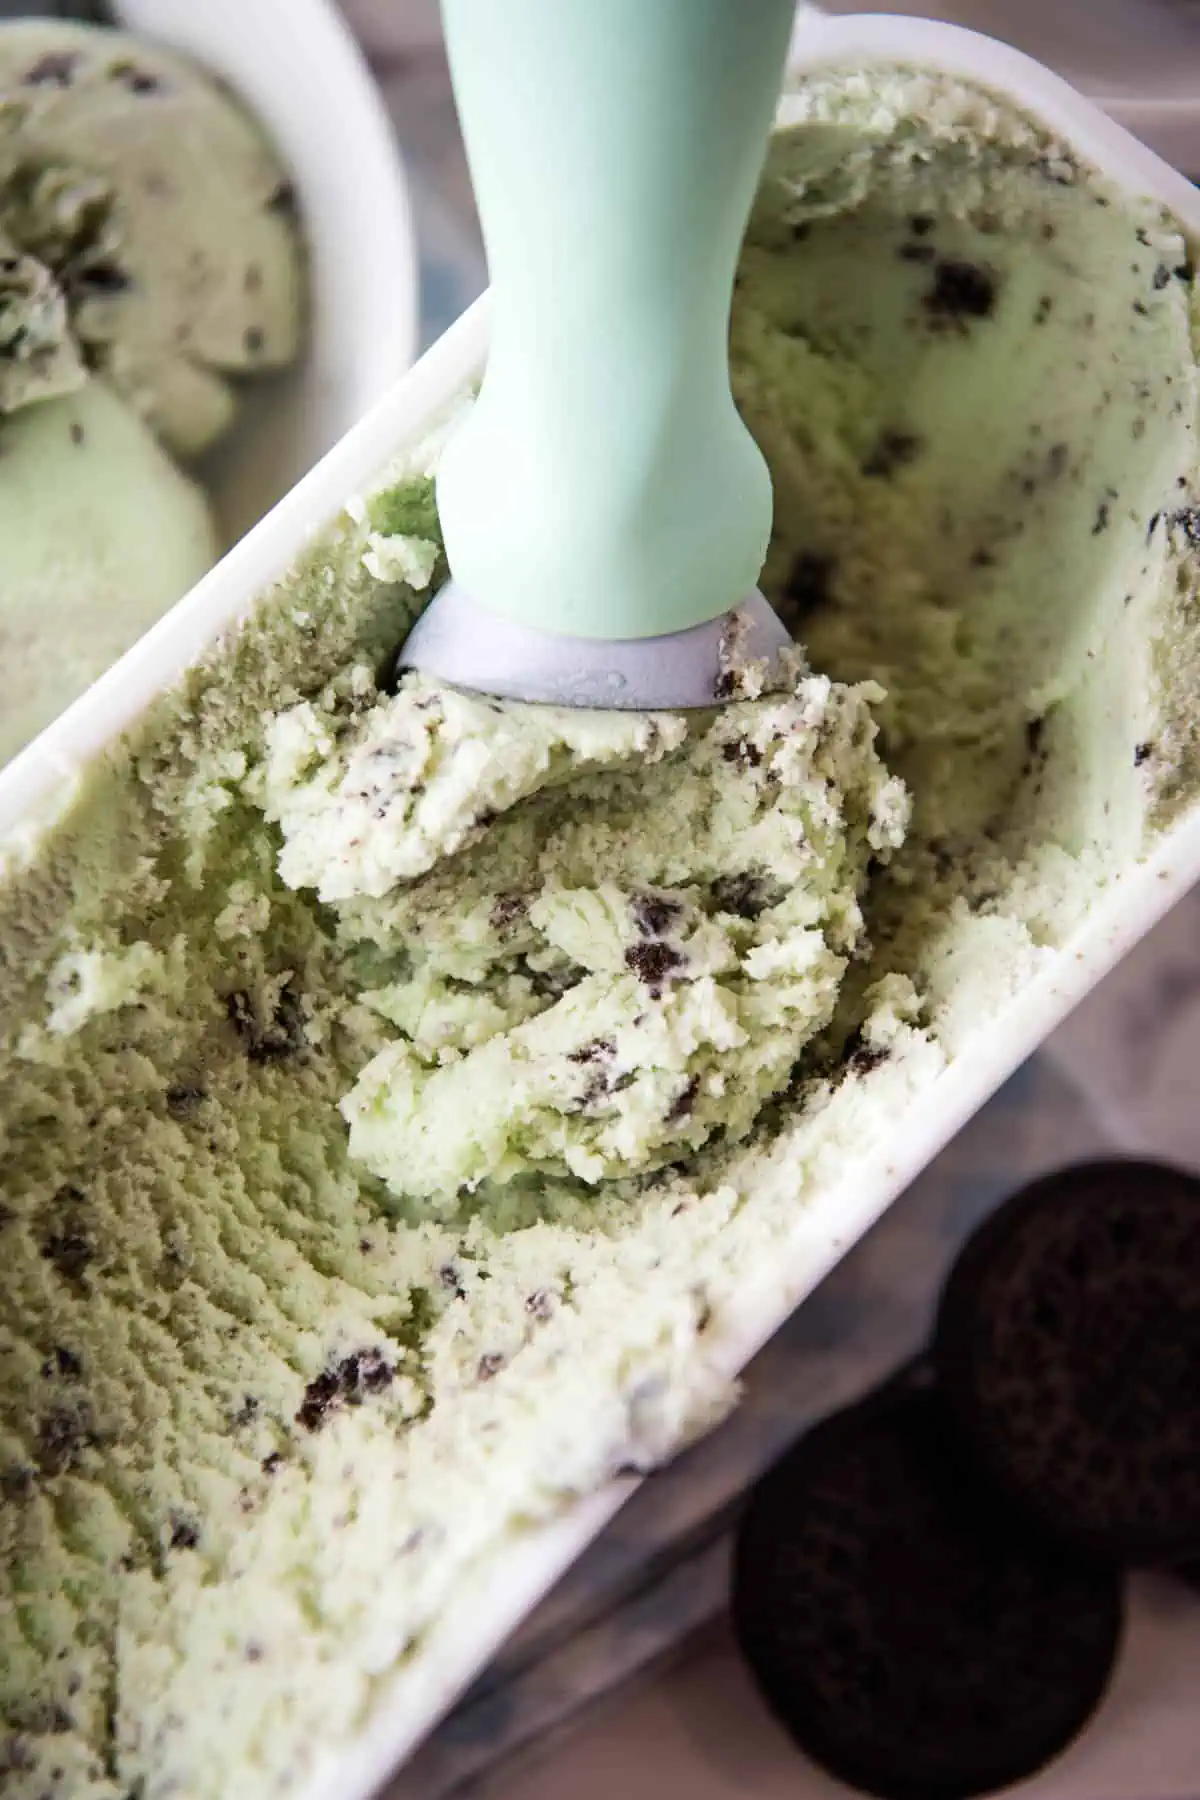 scooping mint cookies and cream ice cream out of white ice cream container